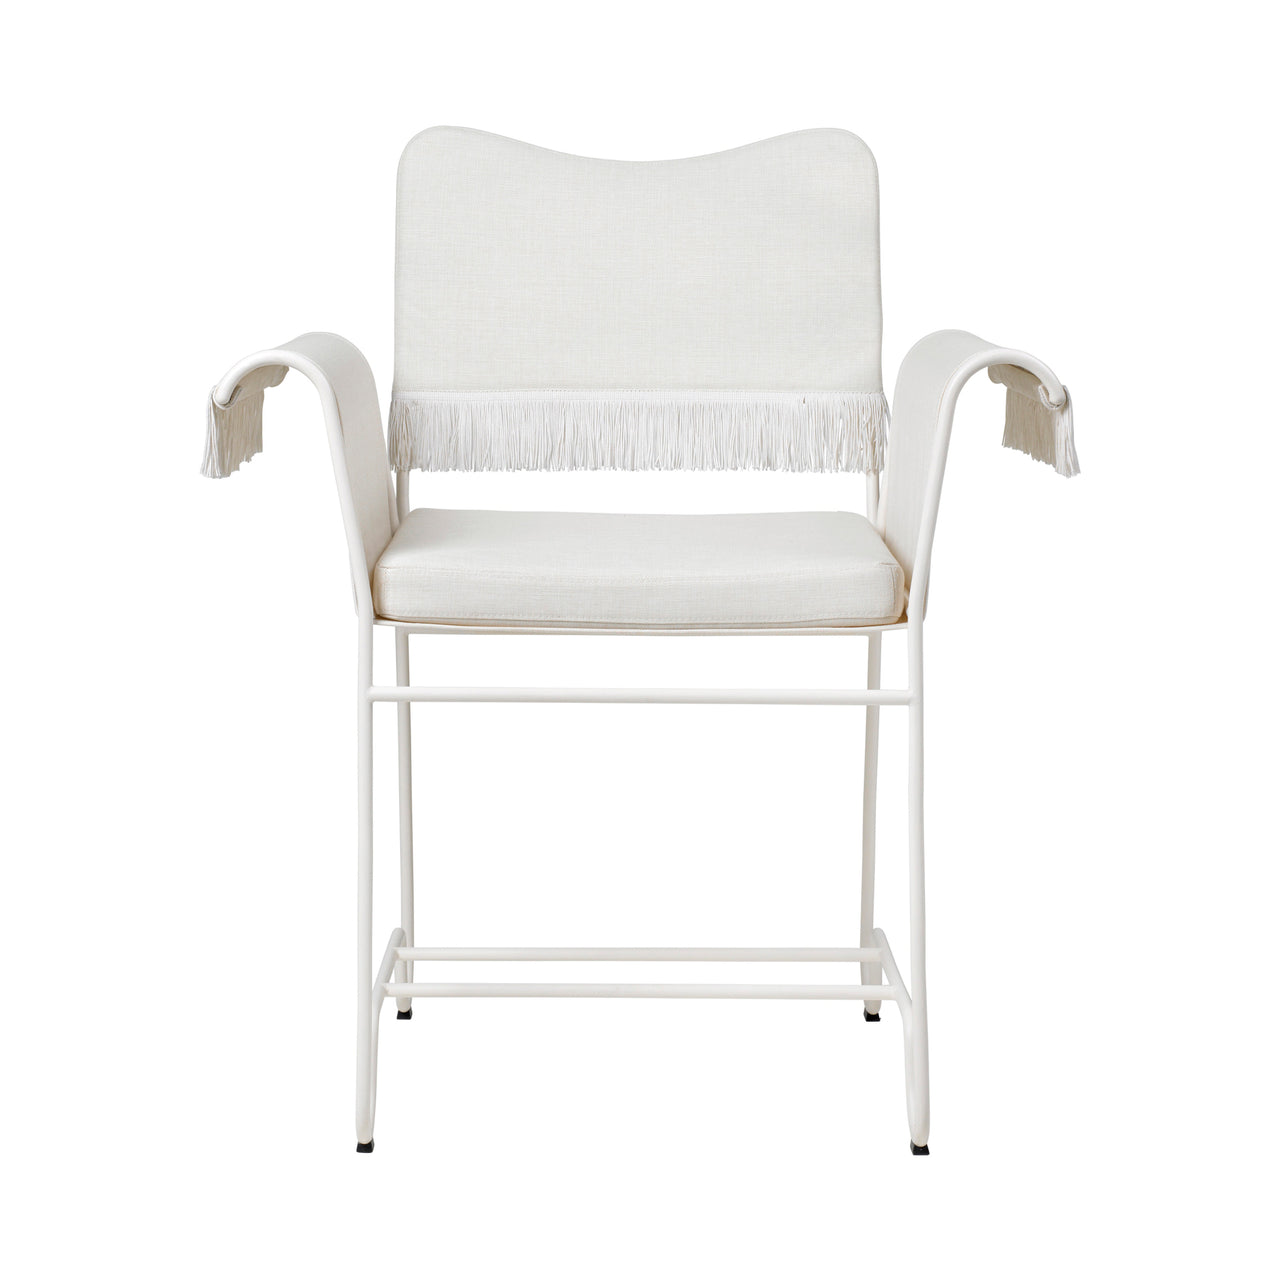 Tropique Dining Chair: Outdoor + With Fringes + White Semi Matt + Leslie 06